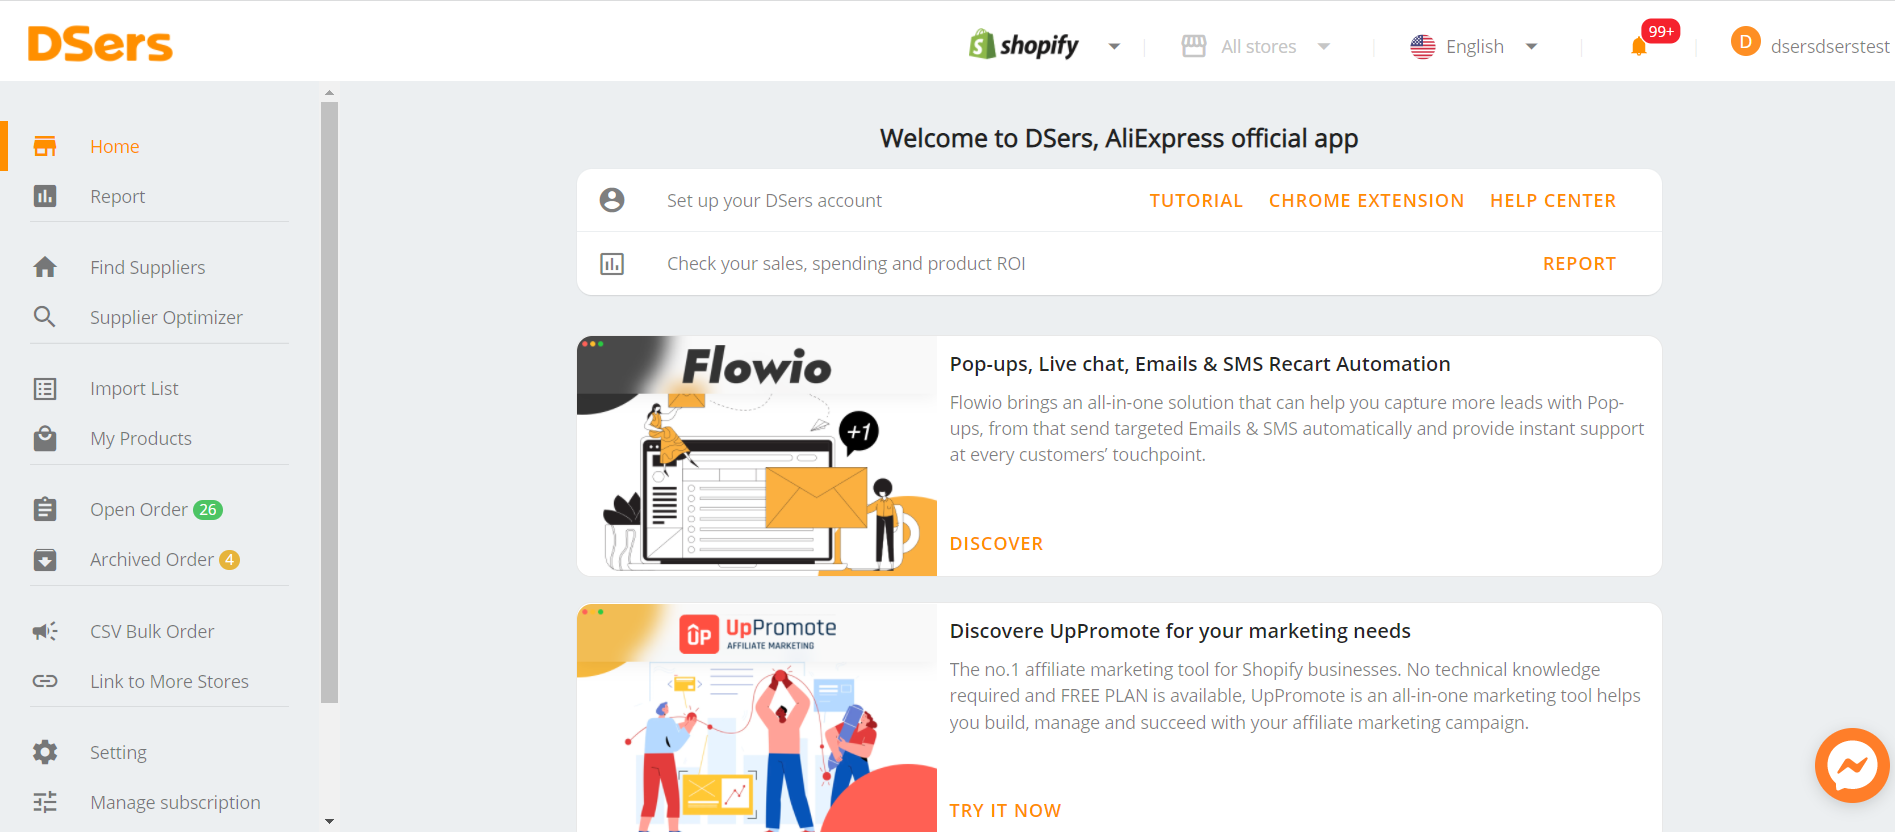 Add Staff Account to your Shopify DSers 8 - DSers